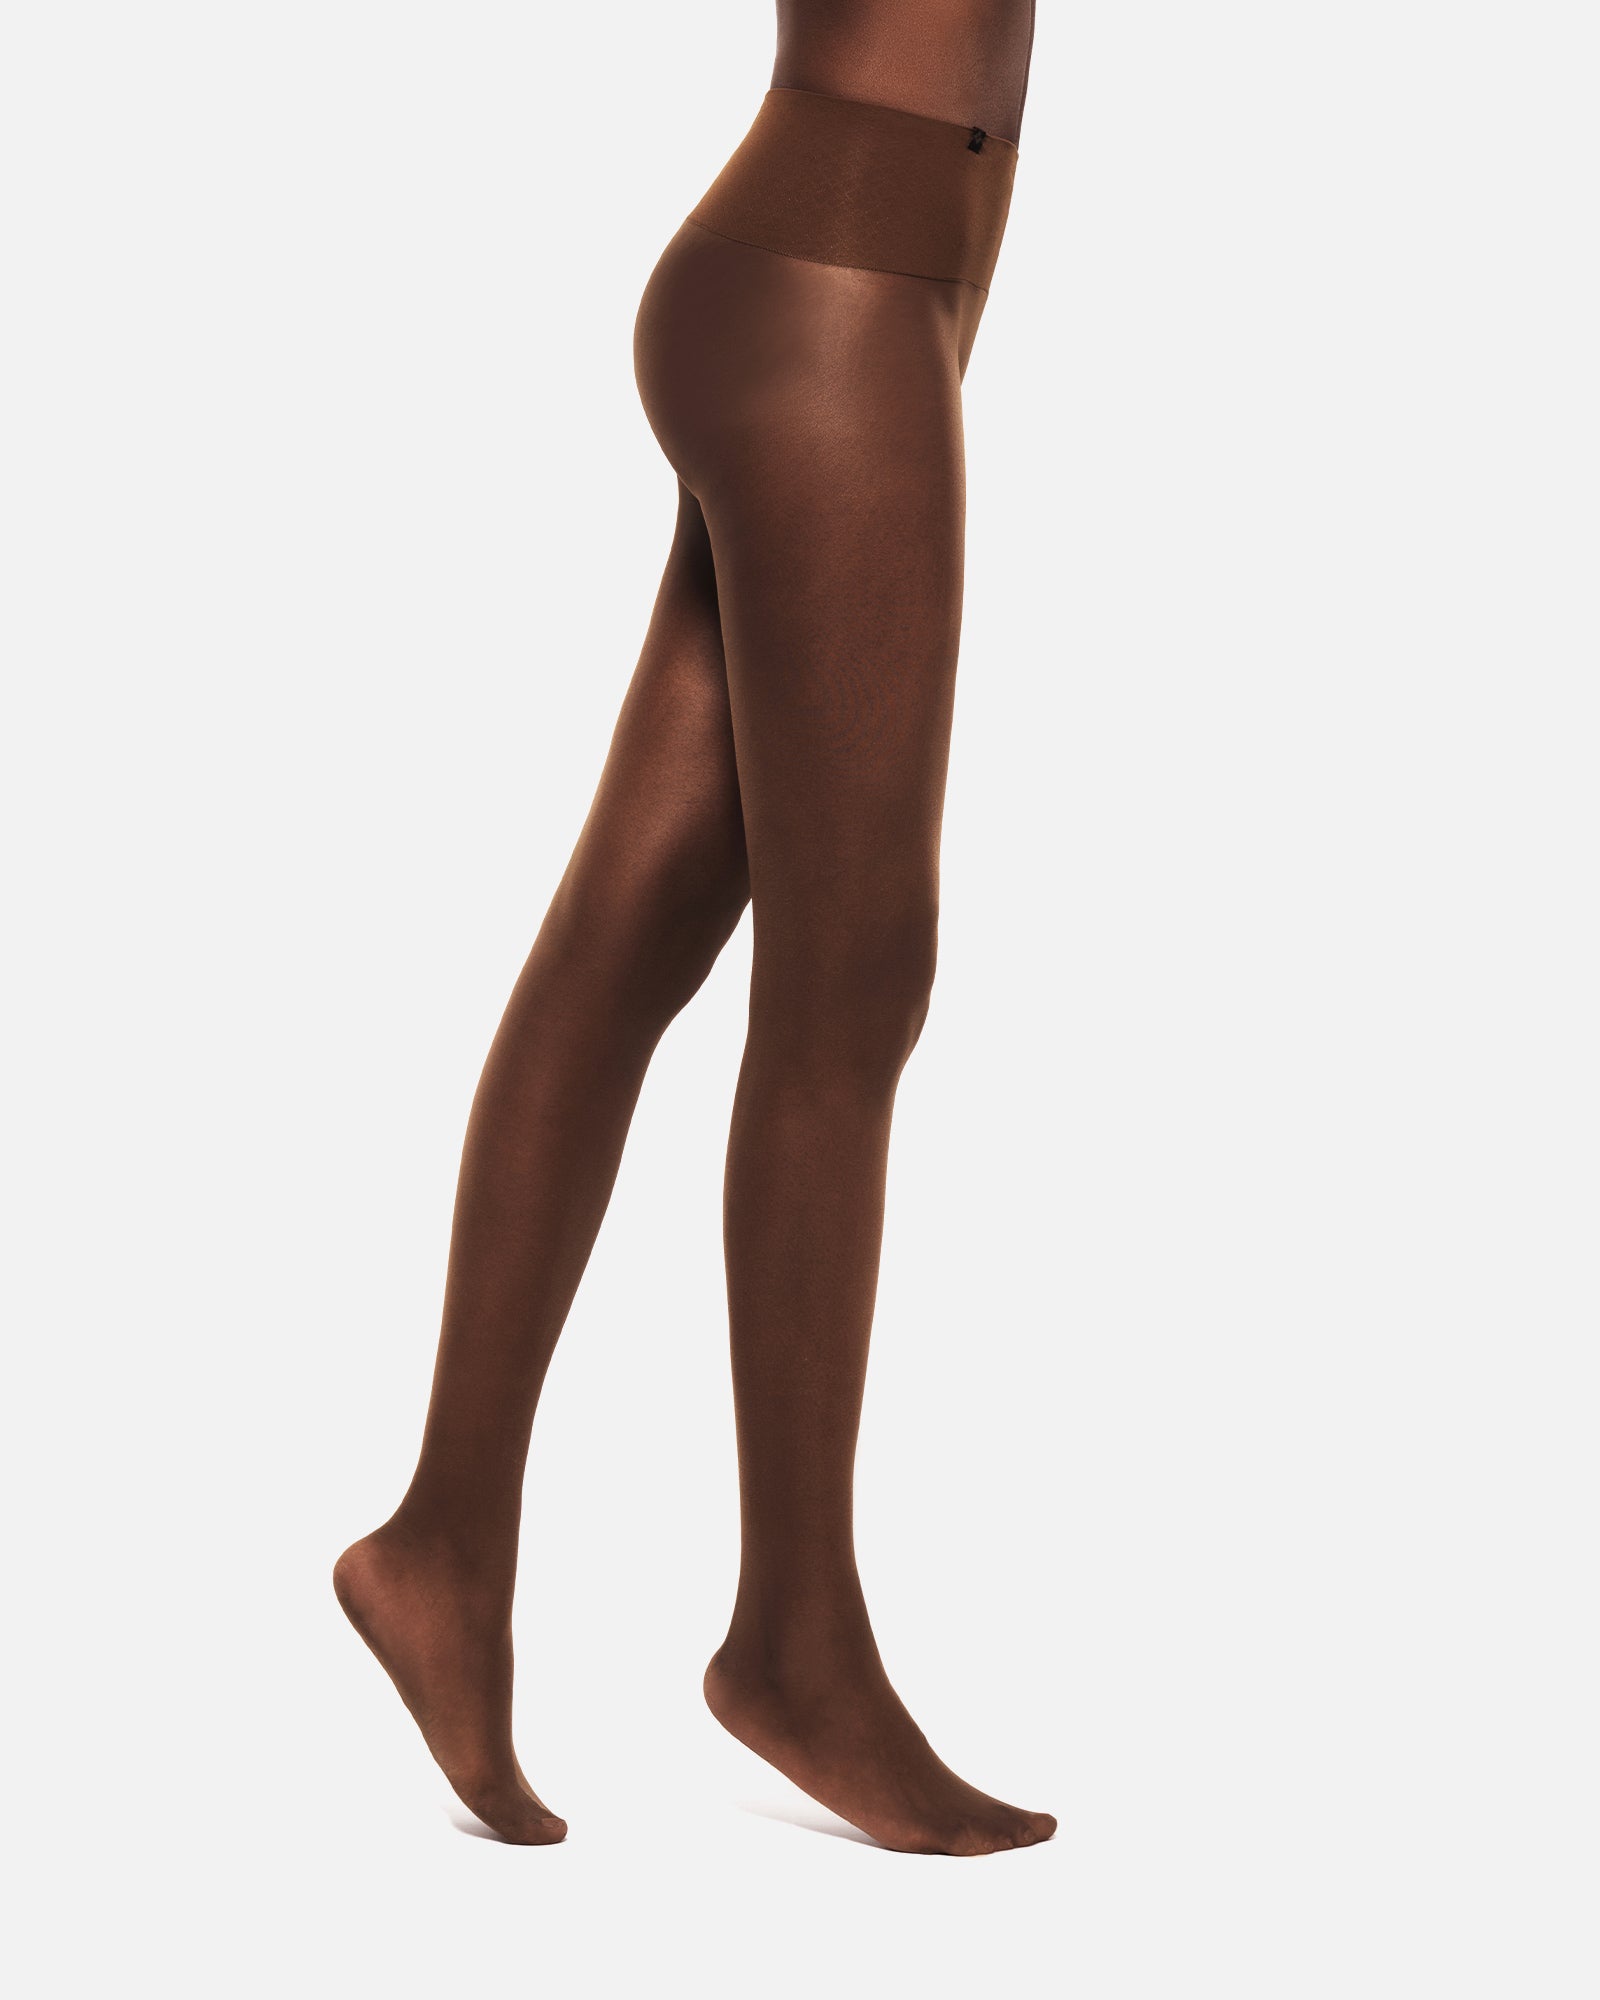 Hedoine The Nude | Spicy Praline Sustainable Hosiery supplied by Hedoine GBP32.00